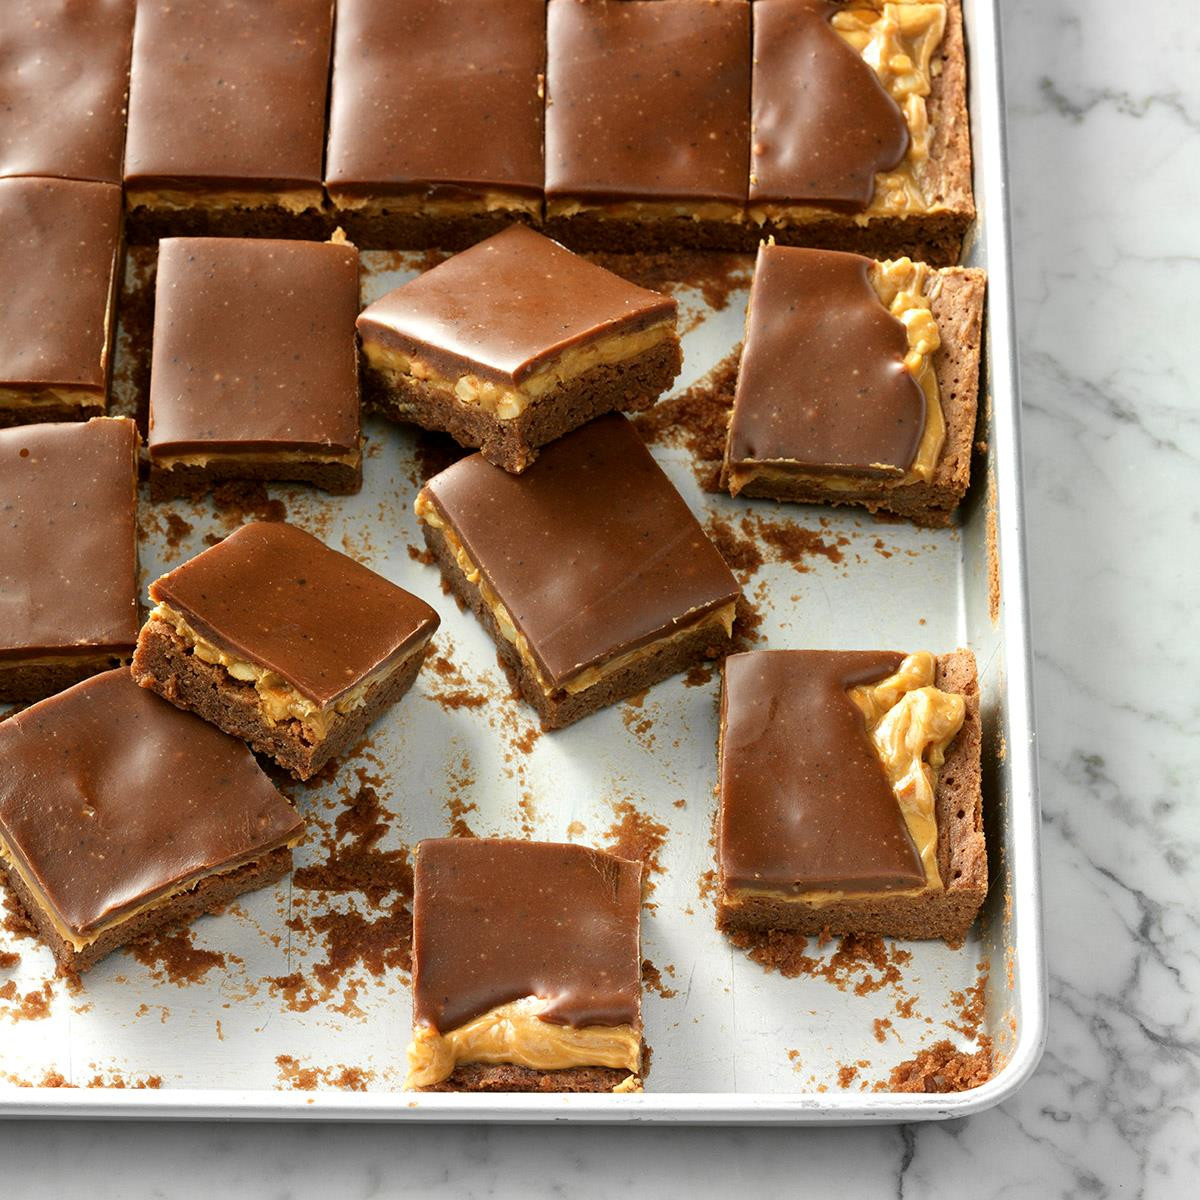 Sheet Pan Desserts For A Crowd
 38 Sheet Pan Desserts That Will Feed A Crowd